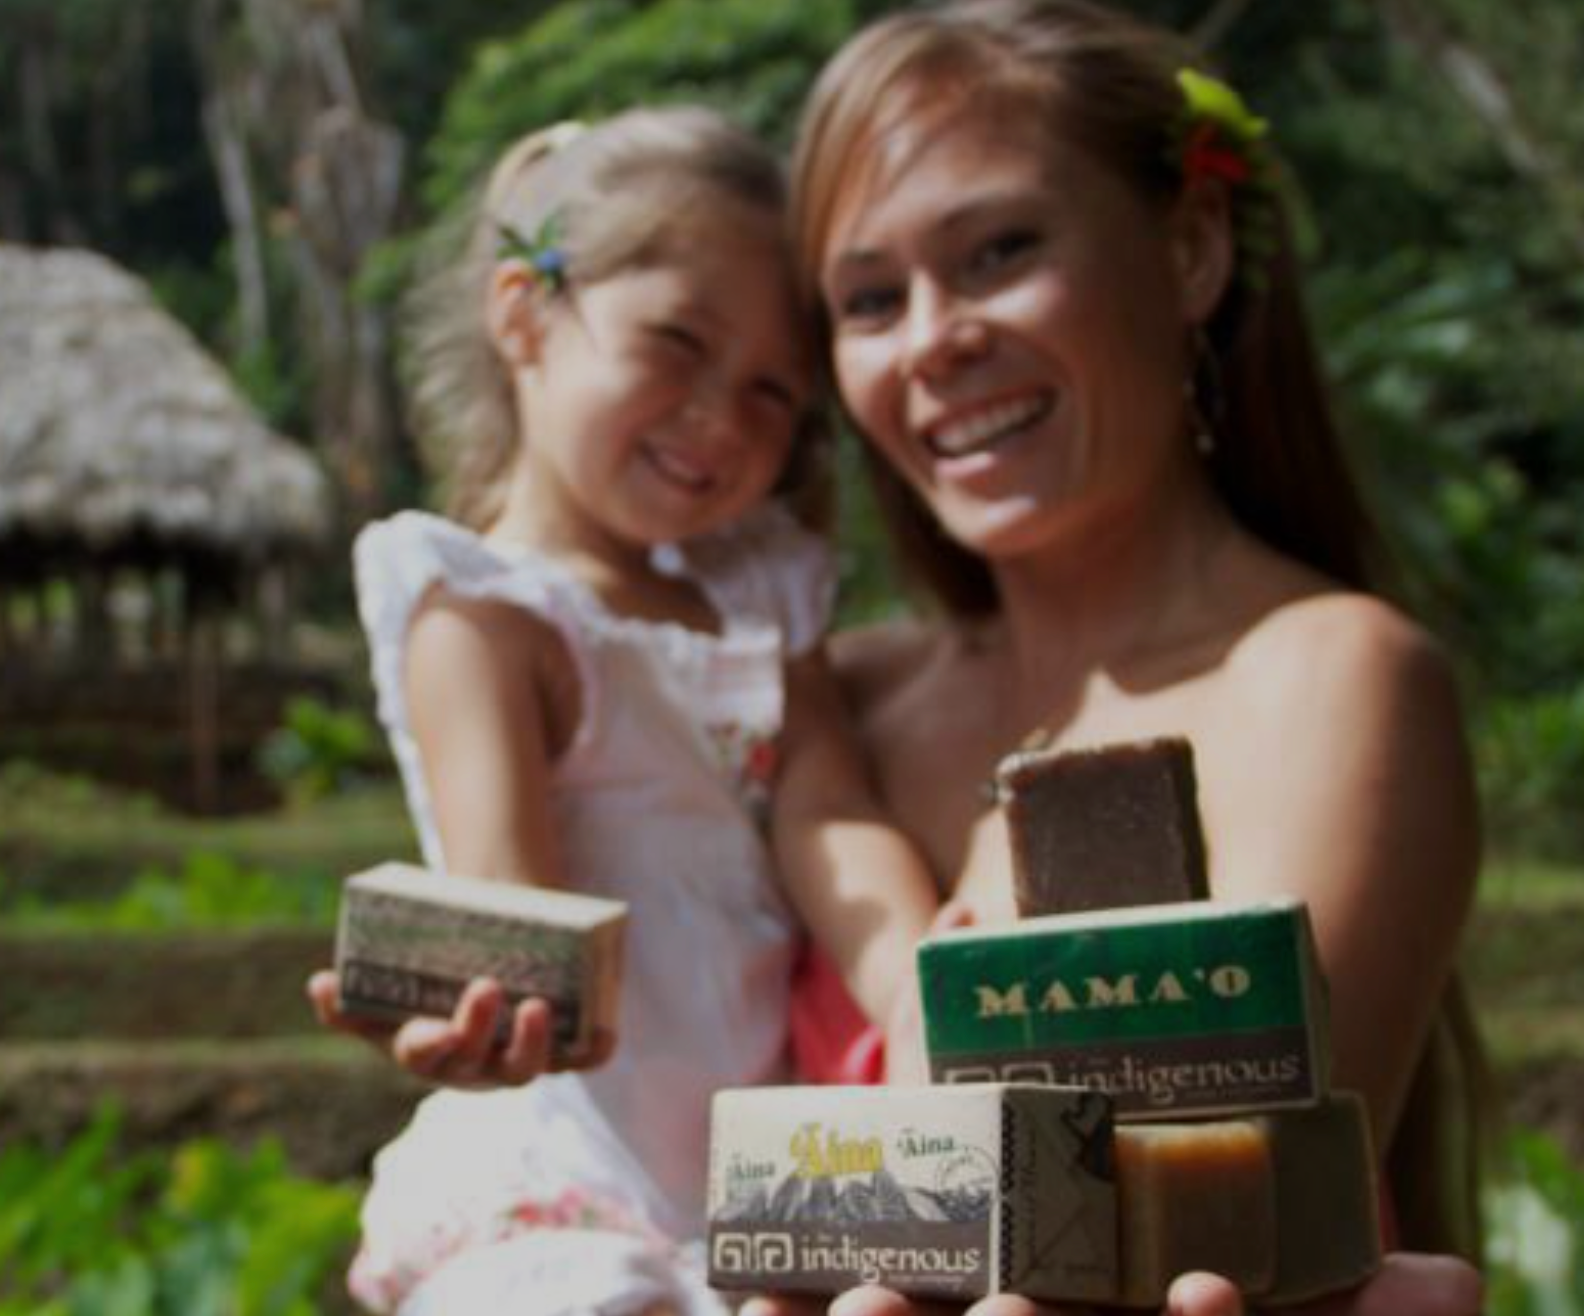 What makes them 'Indigenous Soaps’?